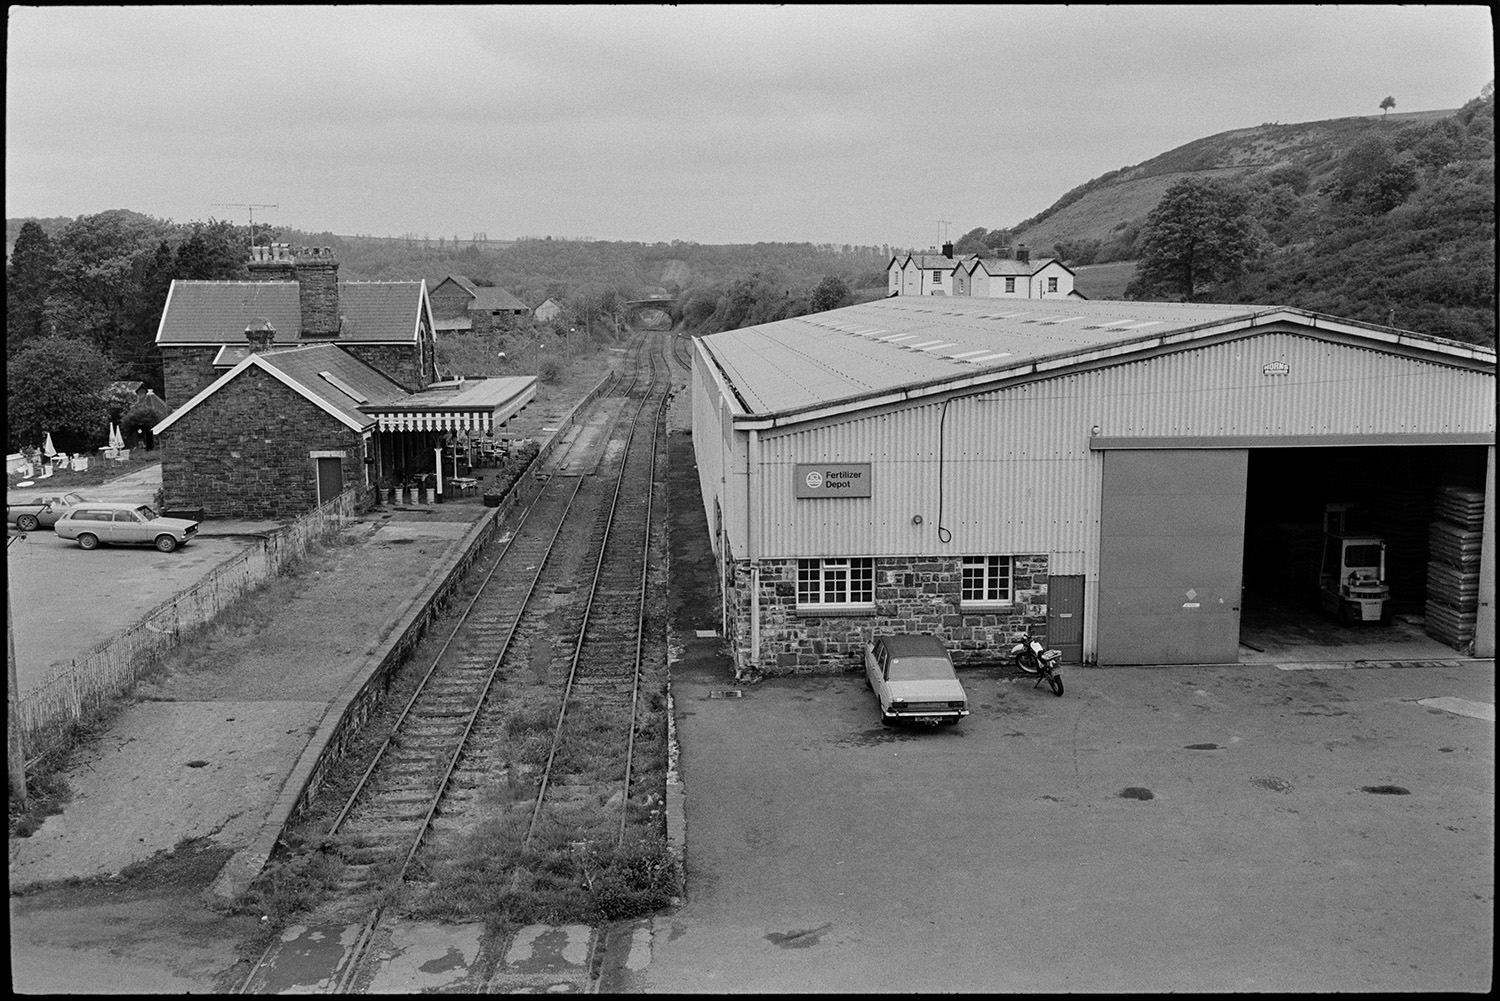 Scenes around town, comparison with old photos, railway line and station, lorries and cars, river.
[A scene taken from a bridge over the railway station and railway lines running past the ICI fertilizer depot, at Torrington. The platform, station buildings and parked cars are visible.]